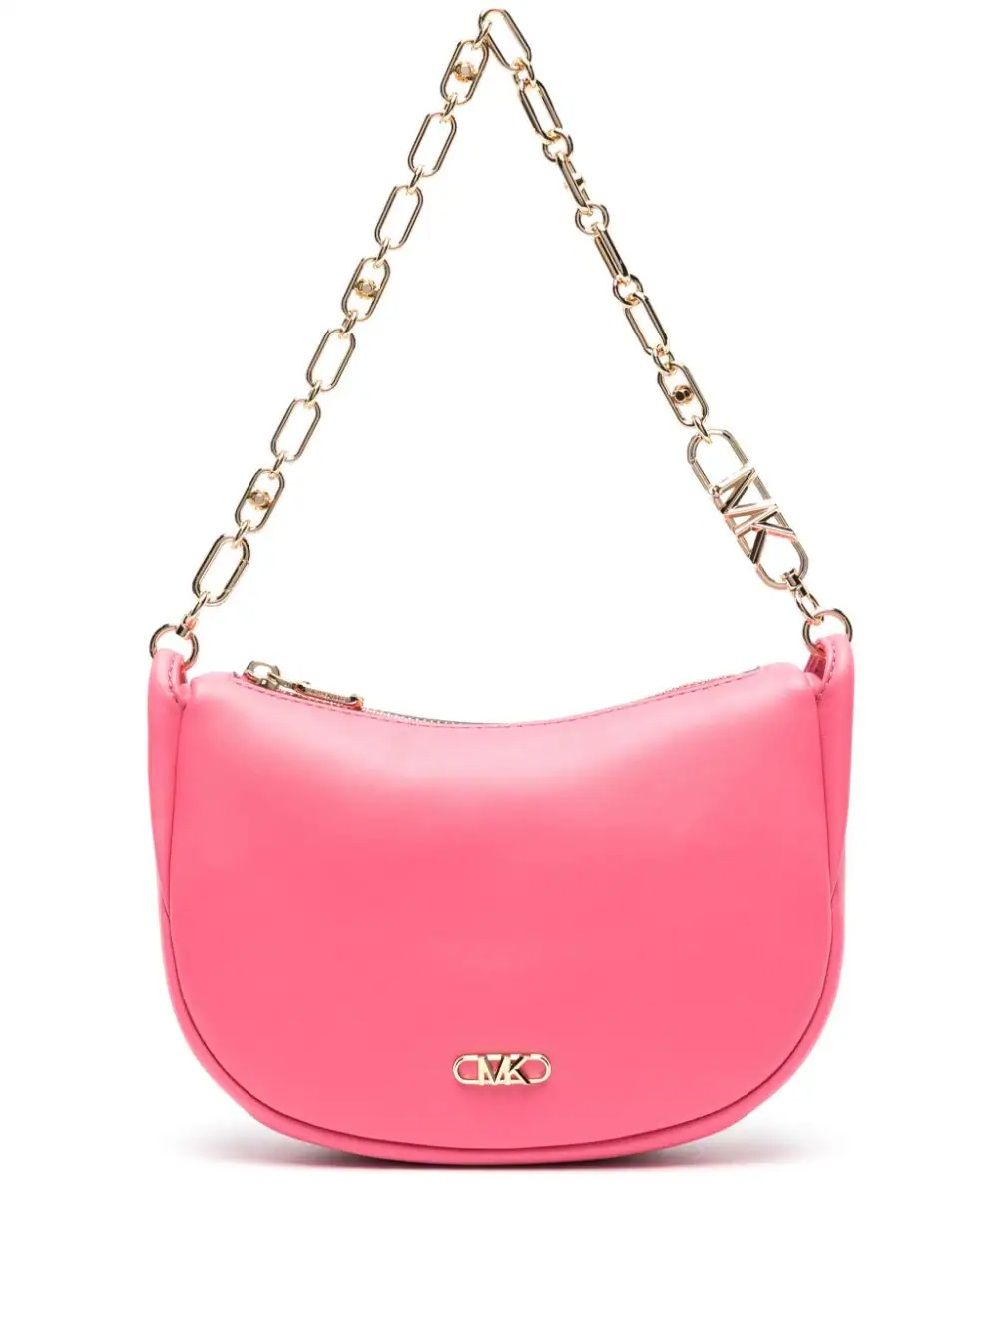 MICHAEL KORS KENDALL SMALL LEATHER SHOULDER ΤΣΑΝΤΑ